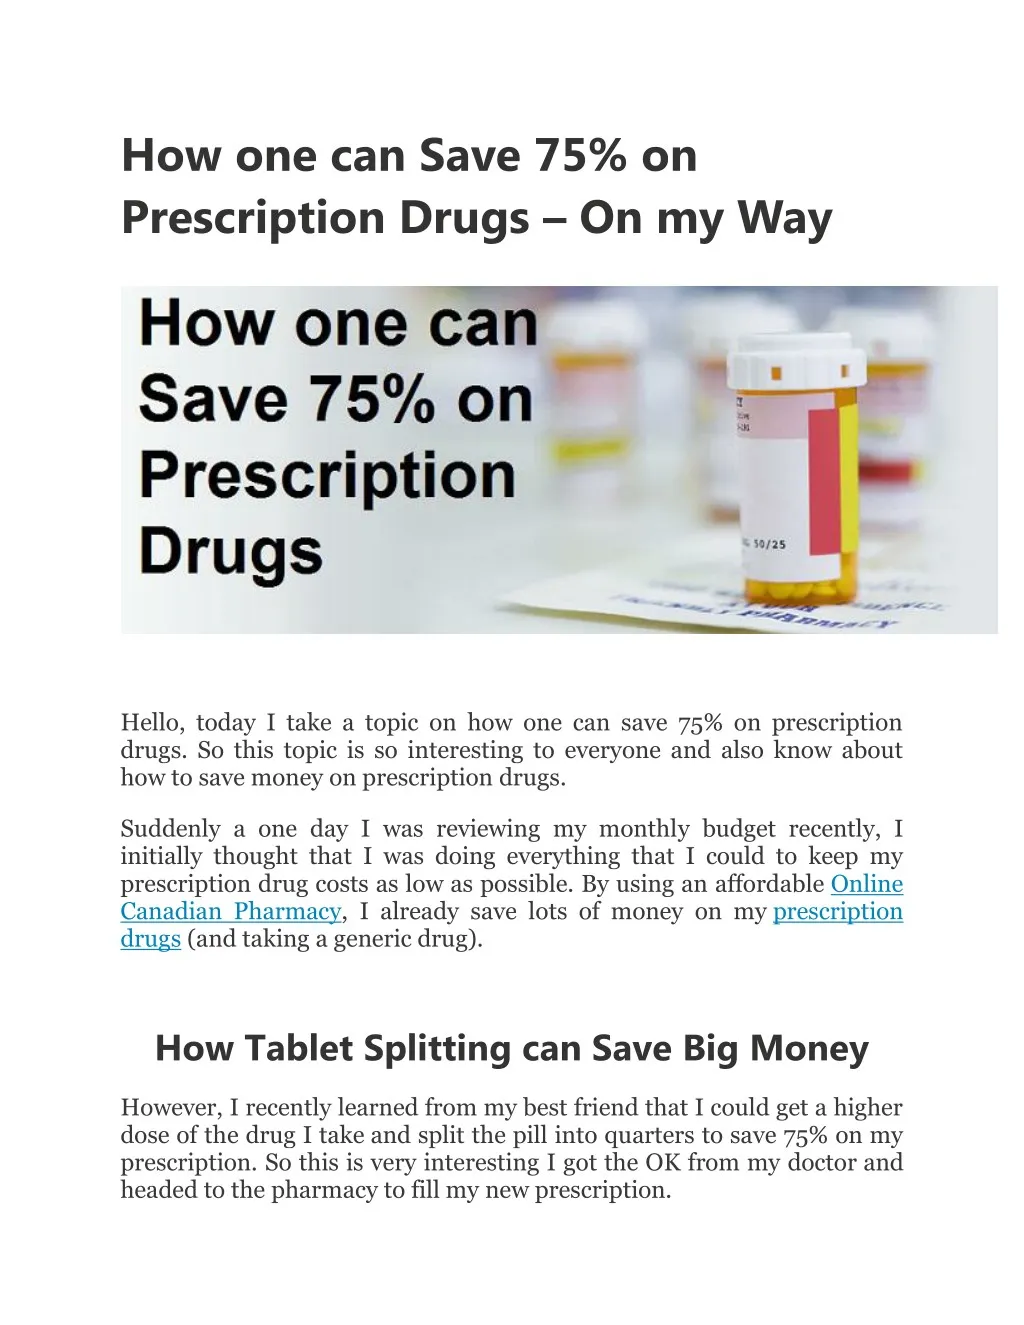 how one can save 75 on prescription drugs